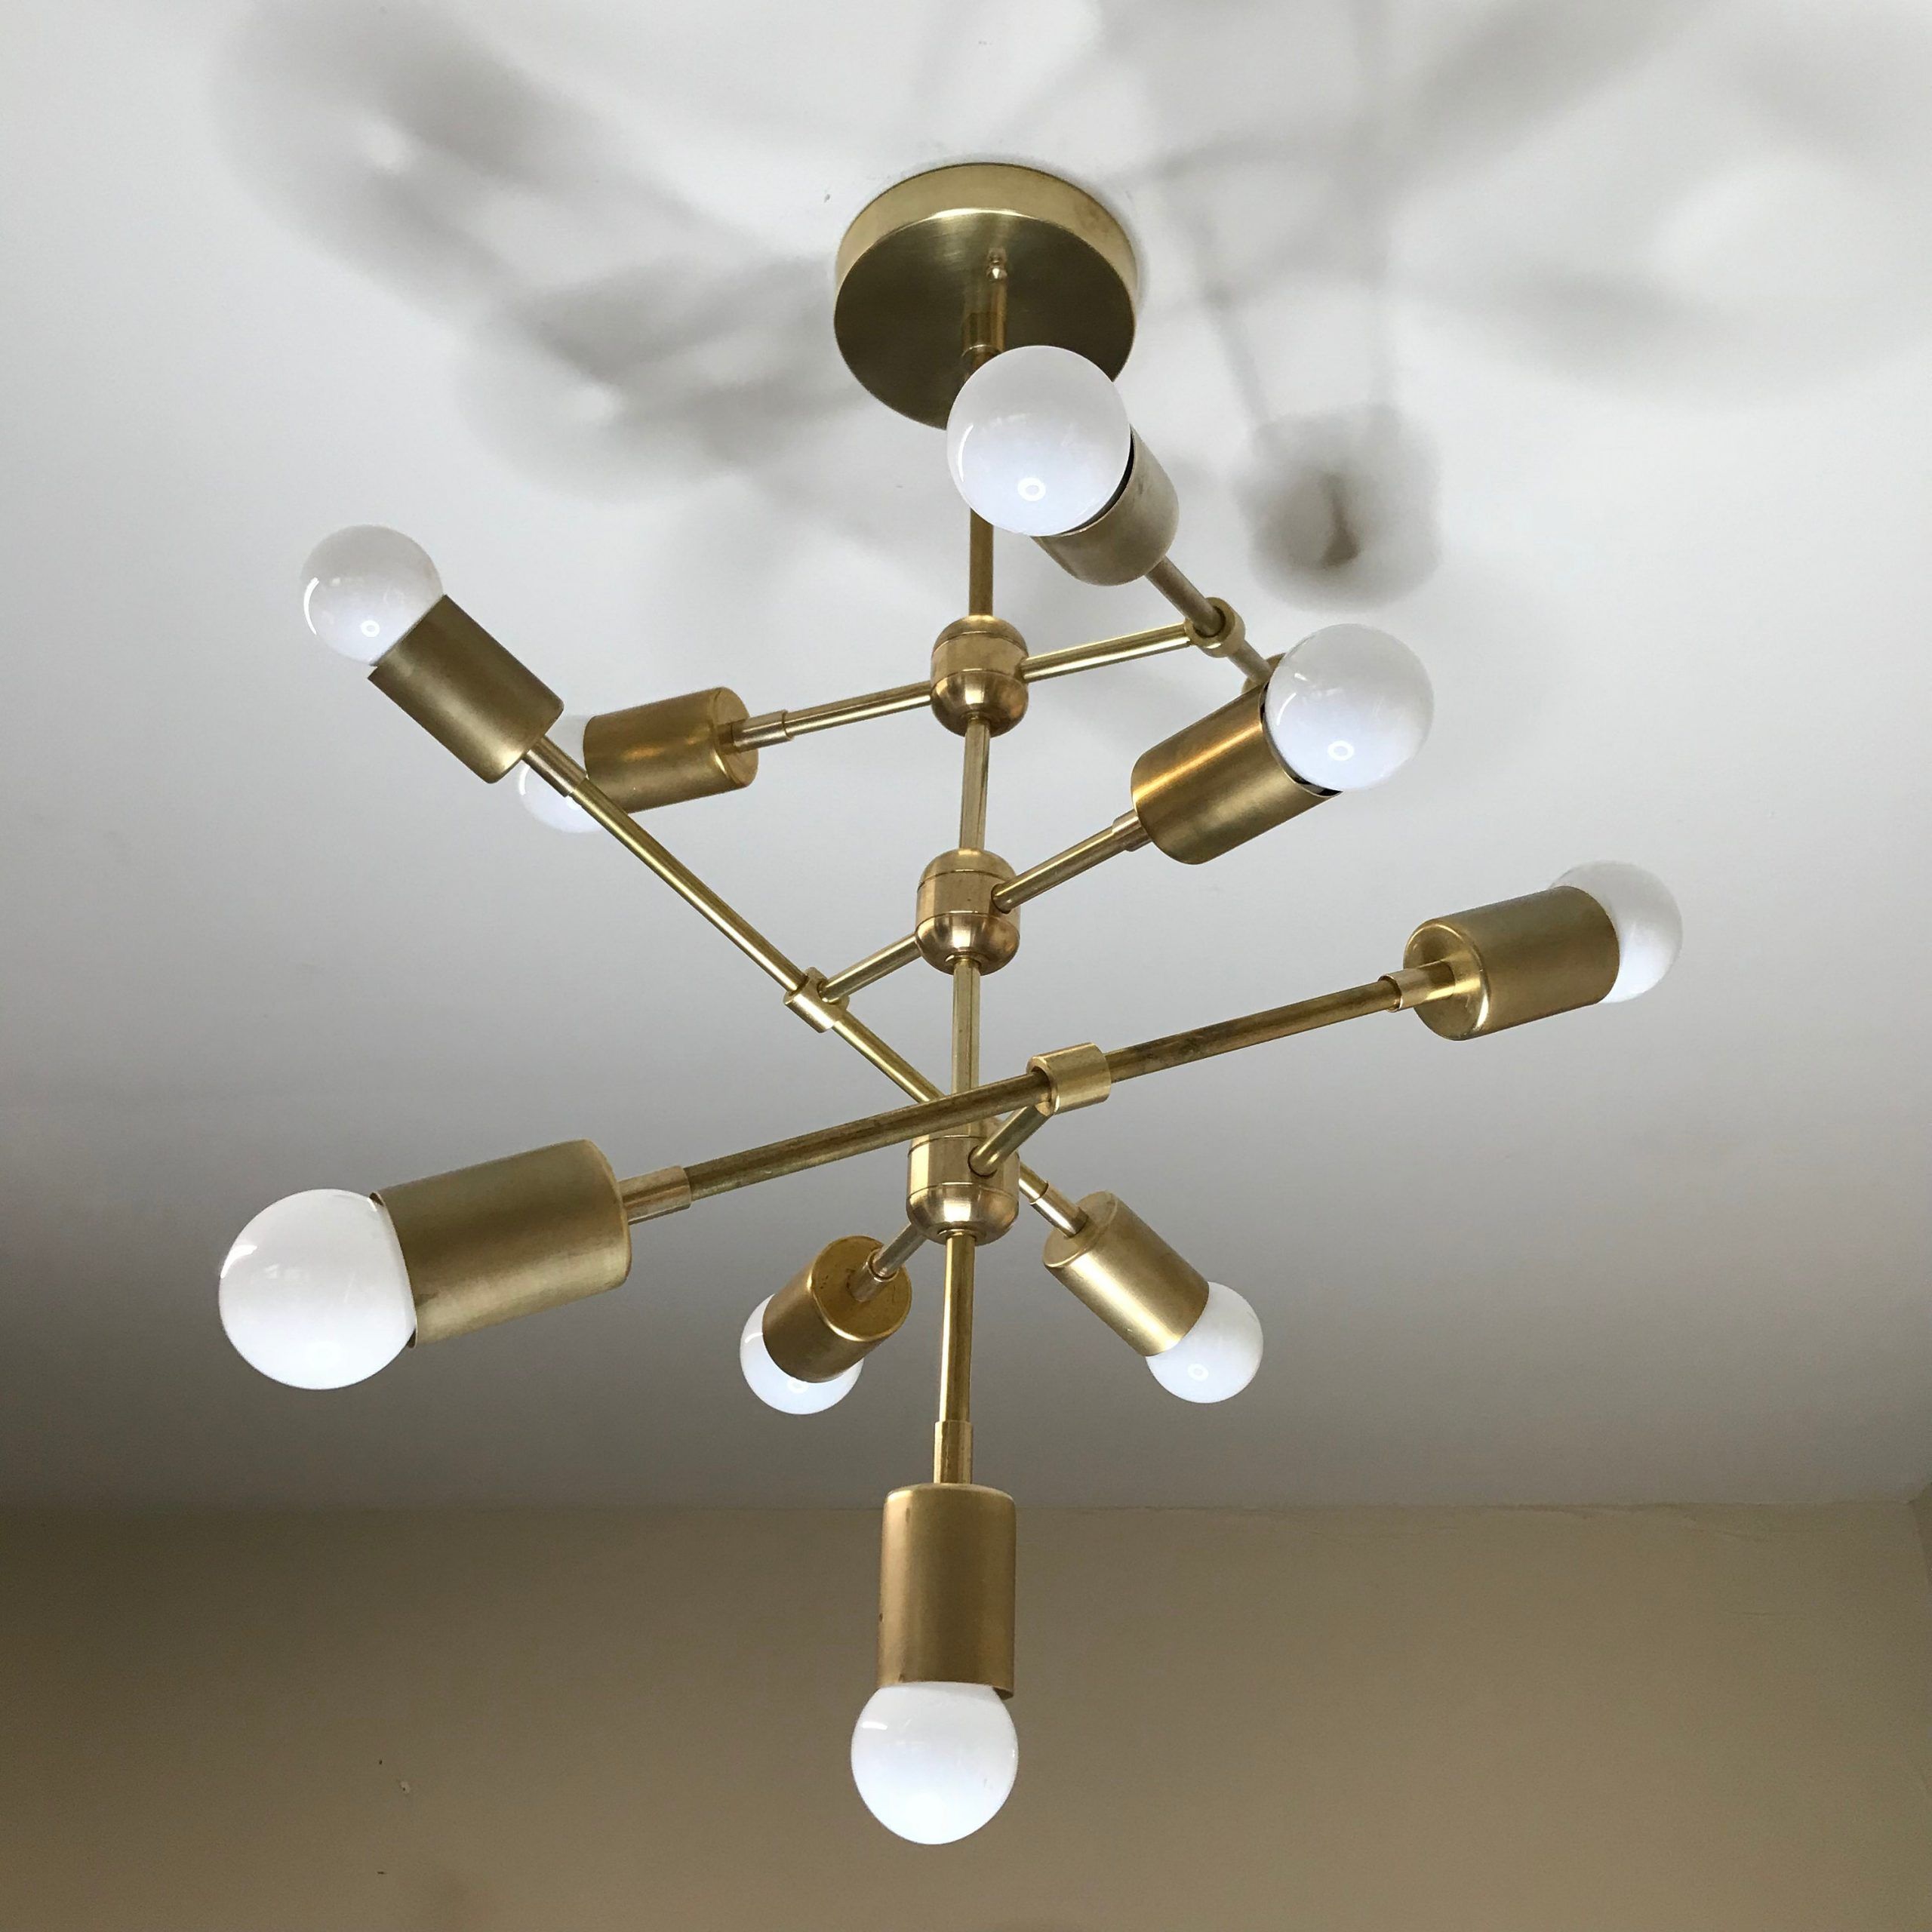 Widely Used Black And Brass 10 Light Chandeliers For Gold Raw Brass Modern Geometric Sputnik Chandelier  (View 8 of 20)